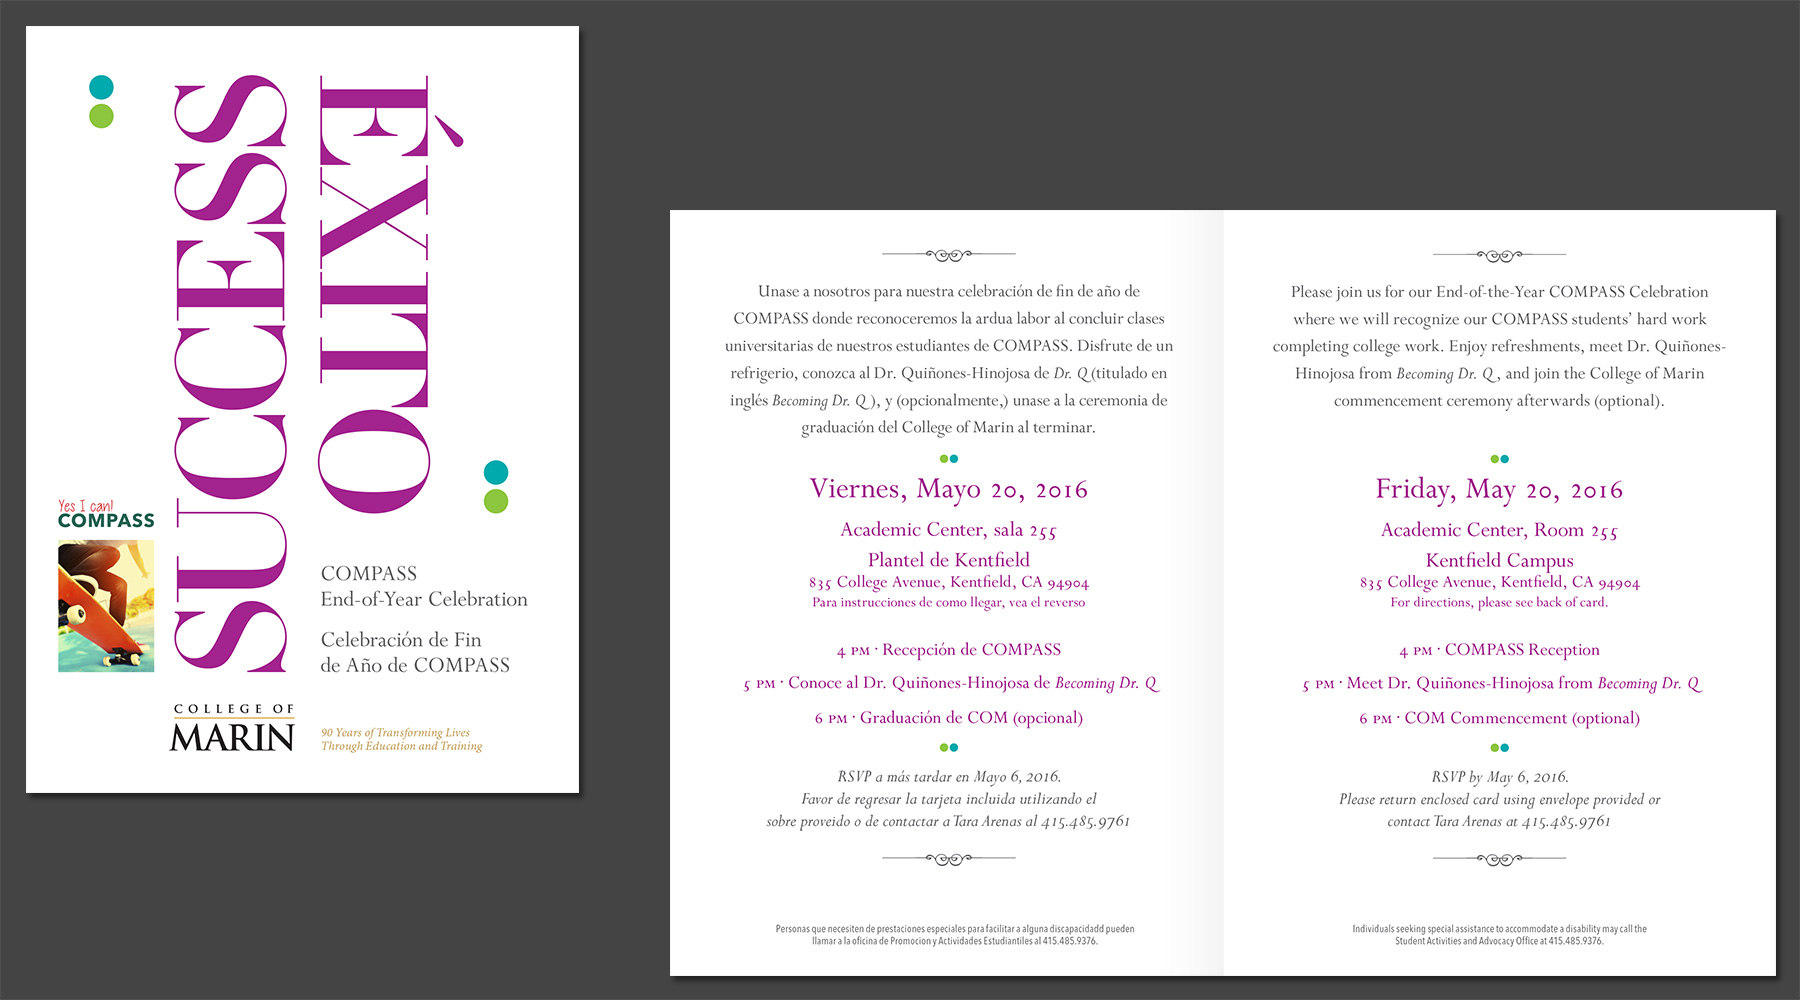 Mail invitation for COMPASS event at College of Marin